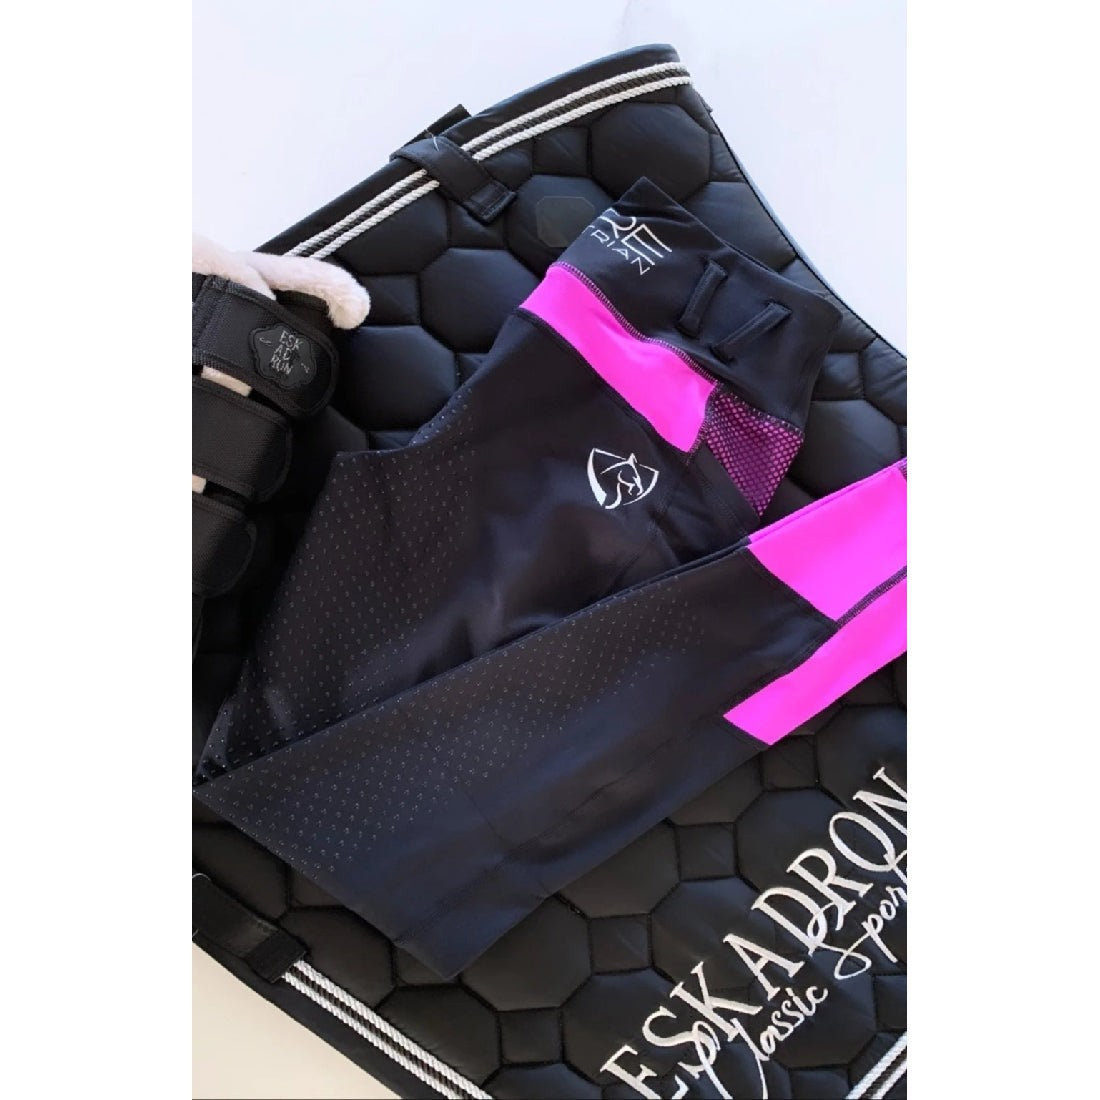 Black and pink horse riding tights with equestrian gear on side.